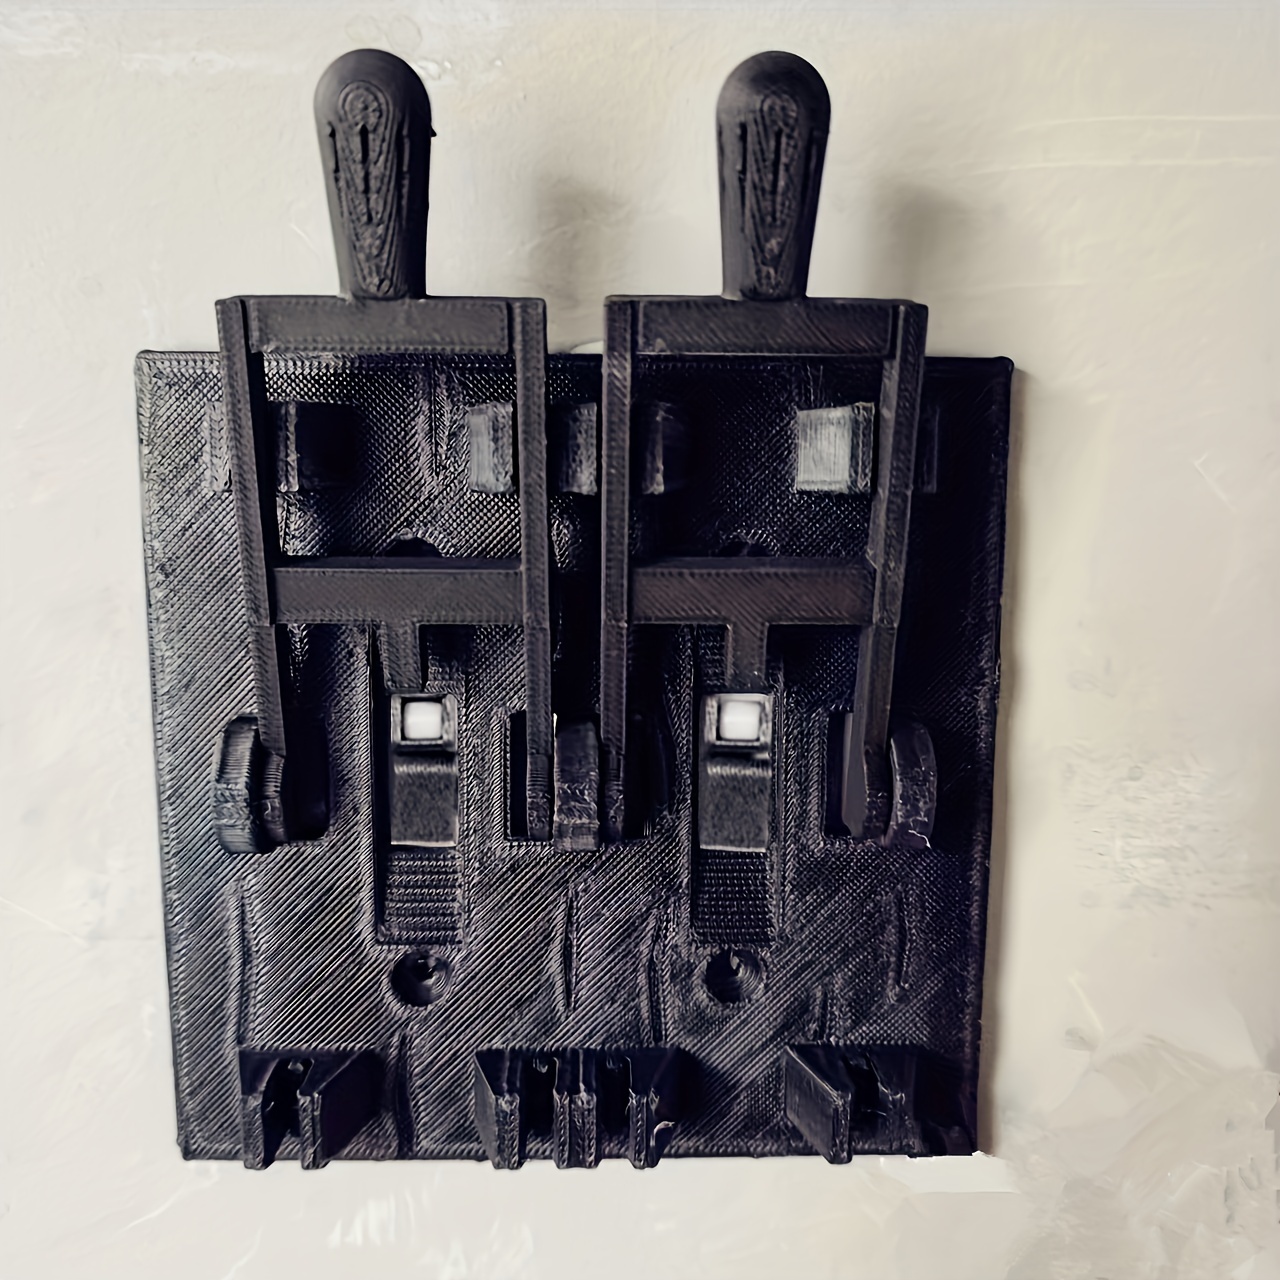 

Easy-install Horror Movie Prop Light Switch Cover With Flip Handles - No Wiring Needed, Unique Home Decor Wall Plate, Black